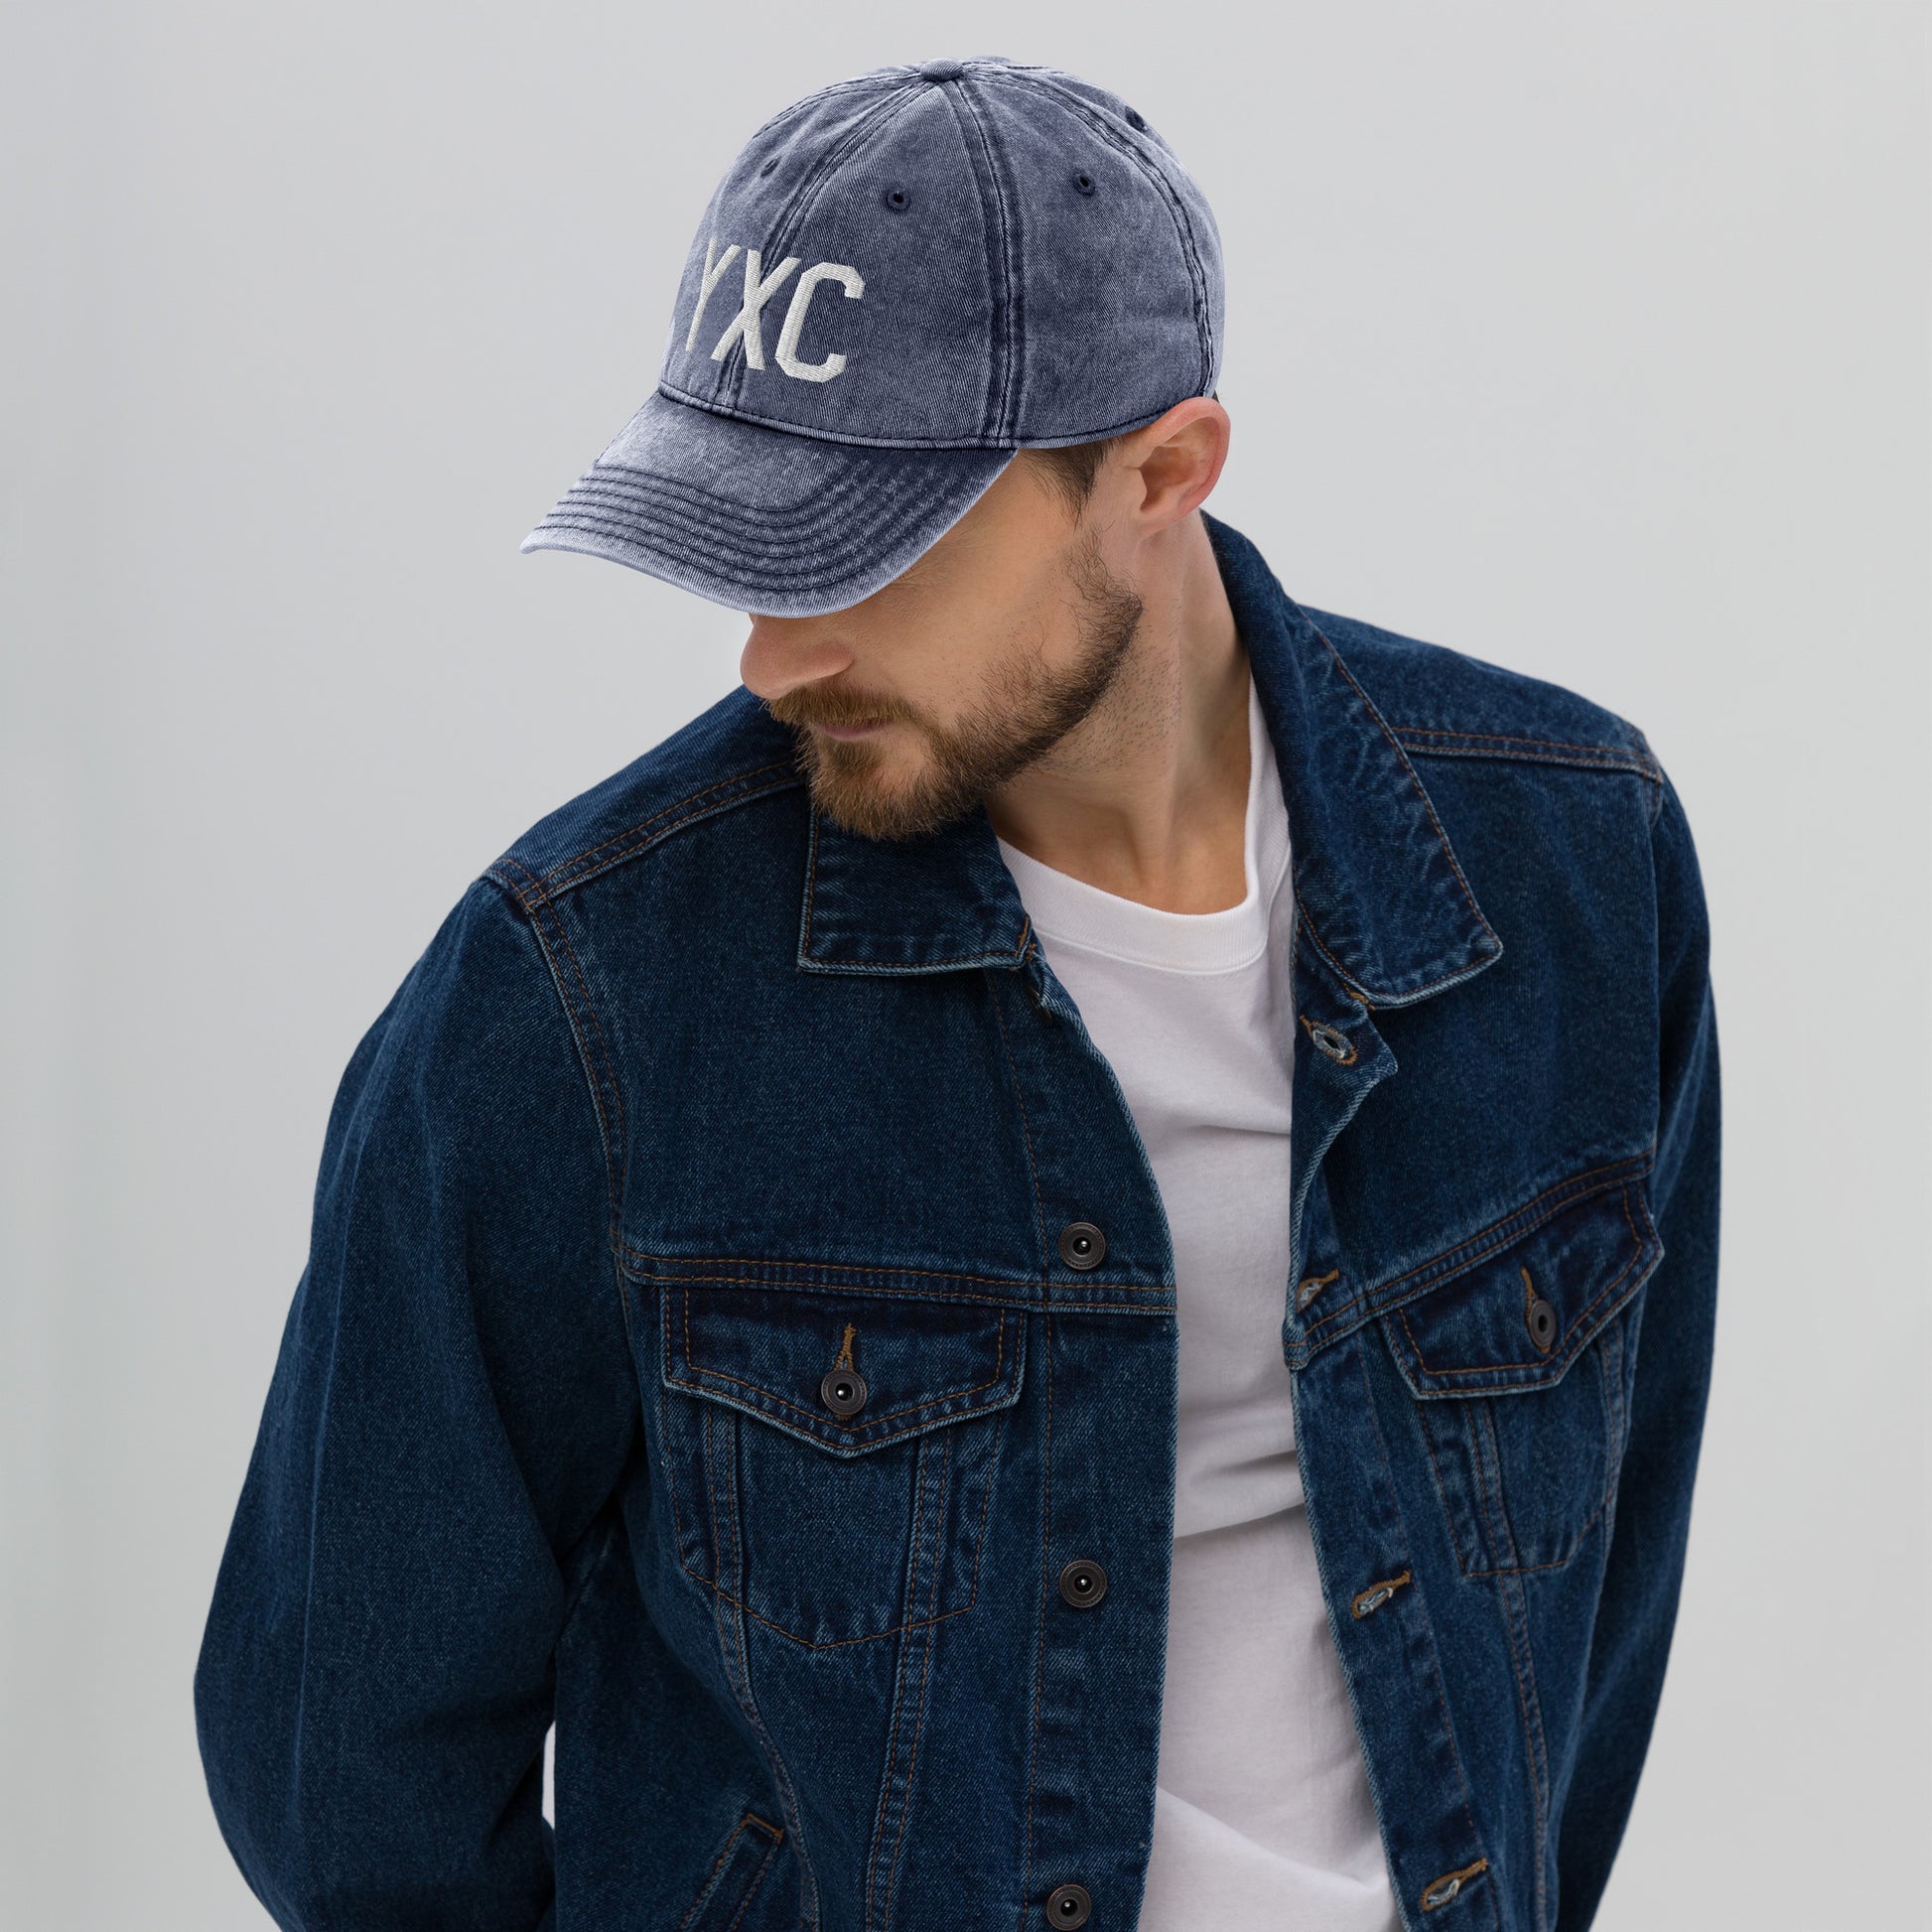 Airport Code Twill Cap - White • YXC Cranbrook • YHM Designs - Image 04